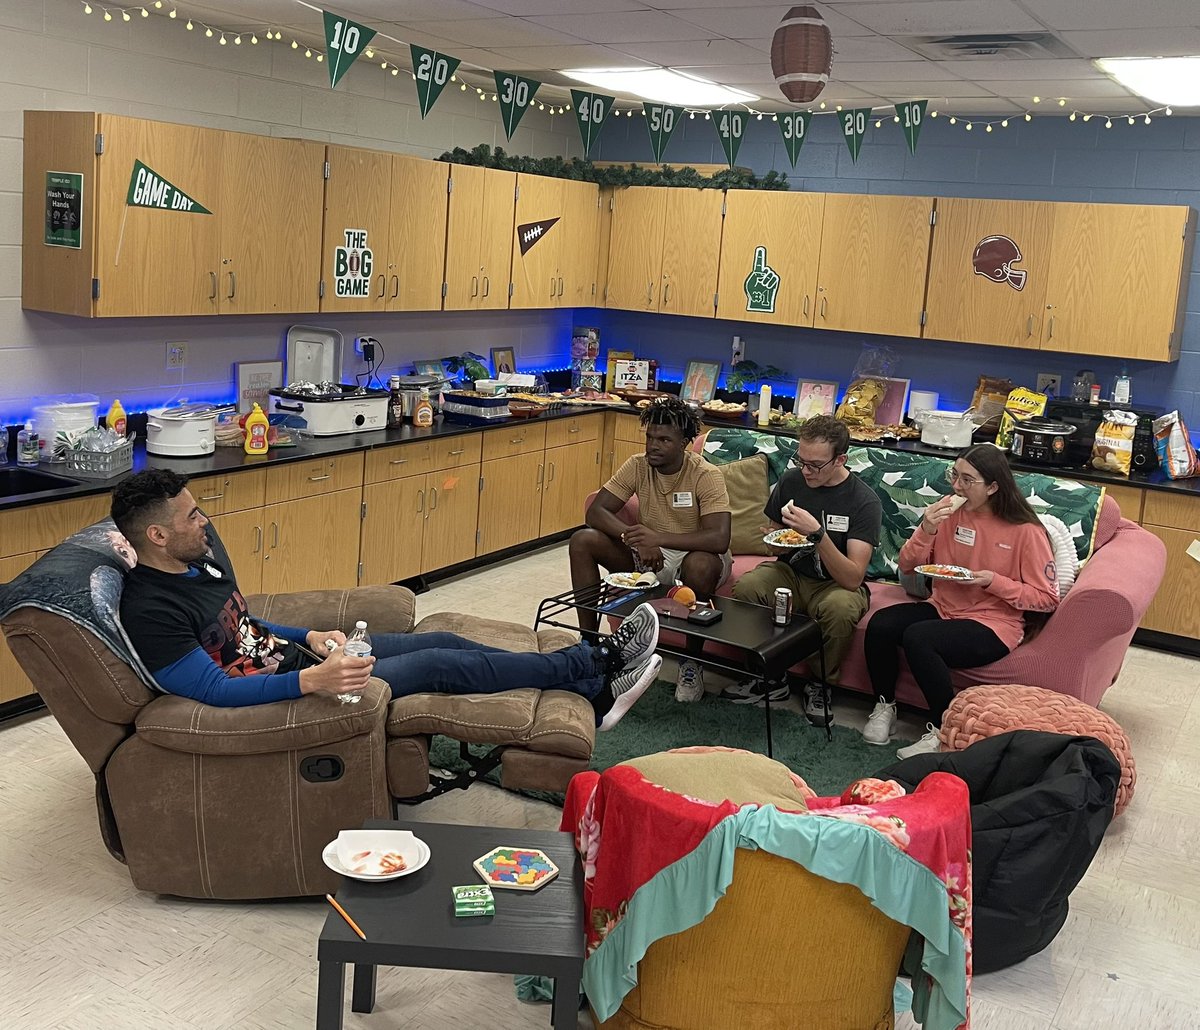 THS band students, Makale, Gabriel, and Alynda joined us in our staff luncheon while subbing in band classes! Check out Mr. Slay sharing our vision while learning about the students’ goals and dreams! #OneBandOneSound @OttTempleISD @Slay_EVERY_dayy @Cynthia01862887 @YBradTISD